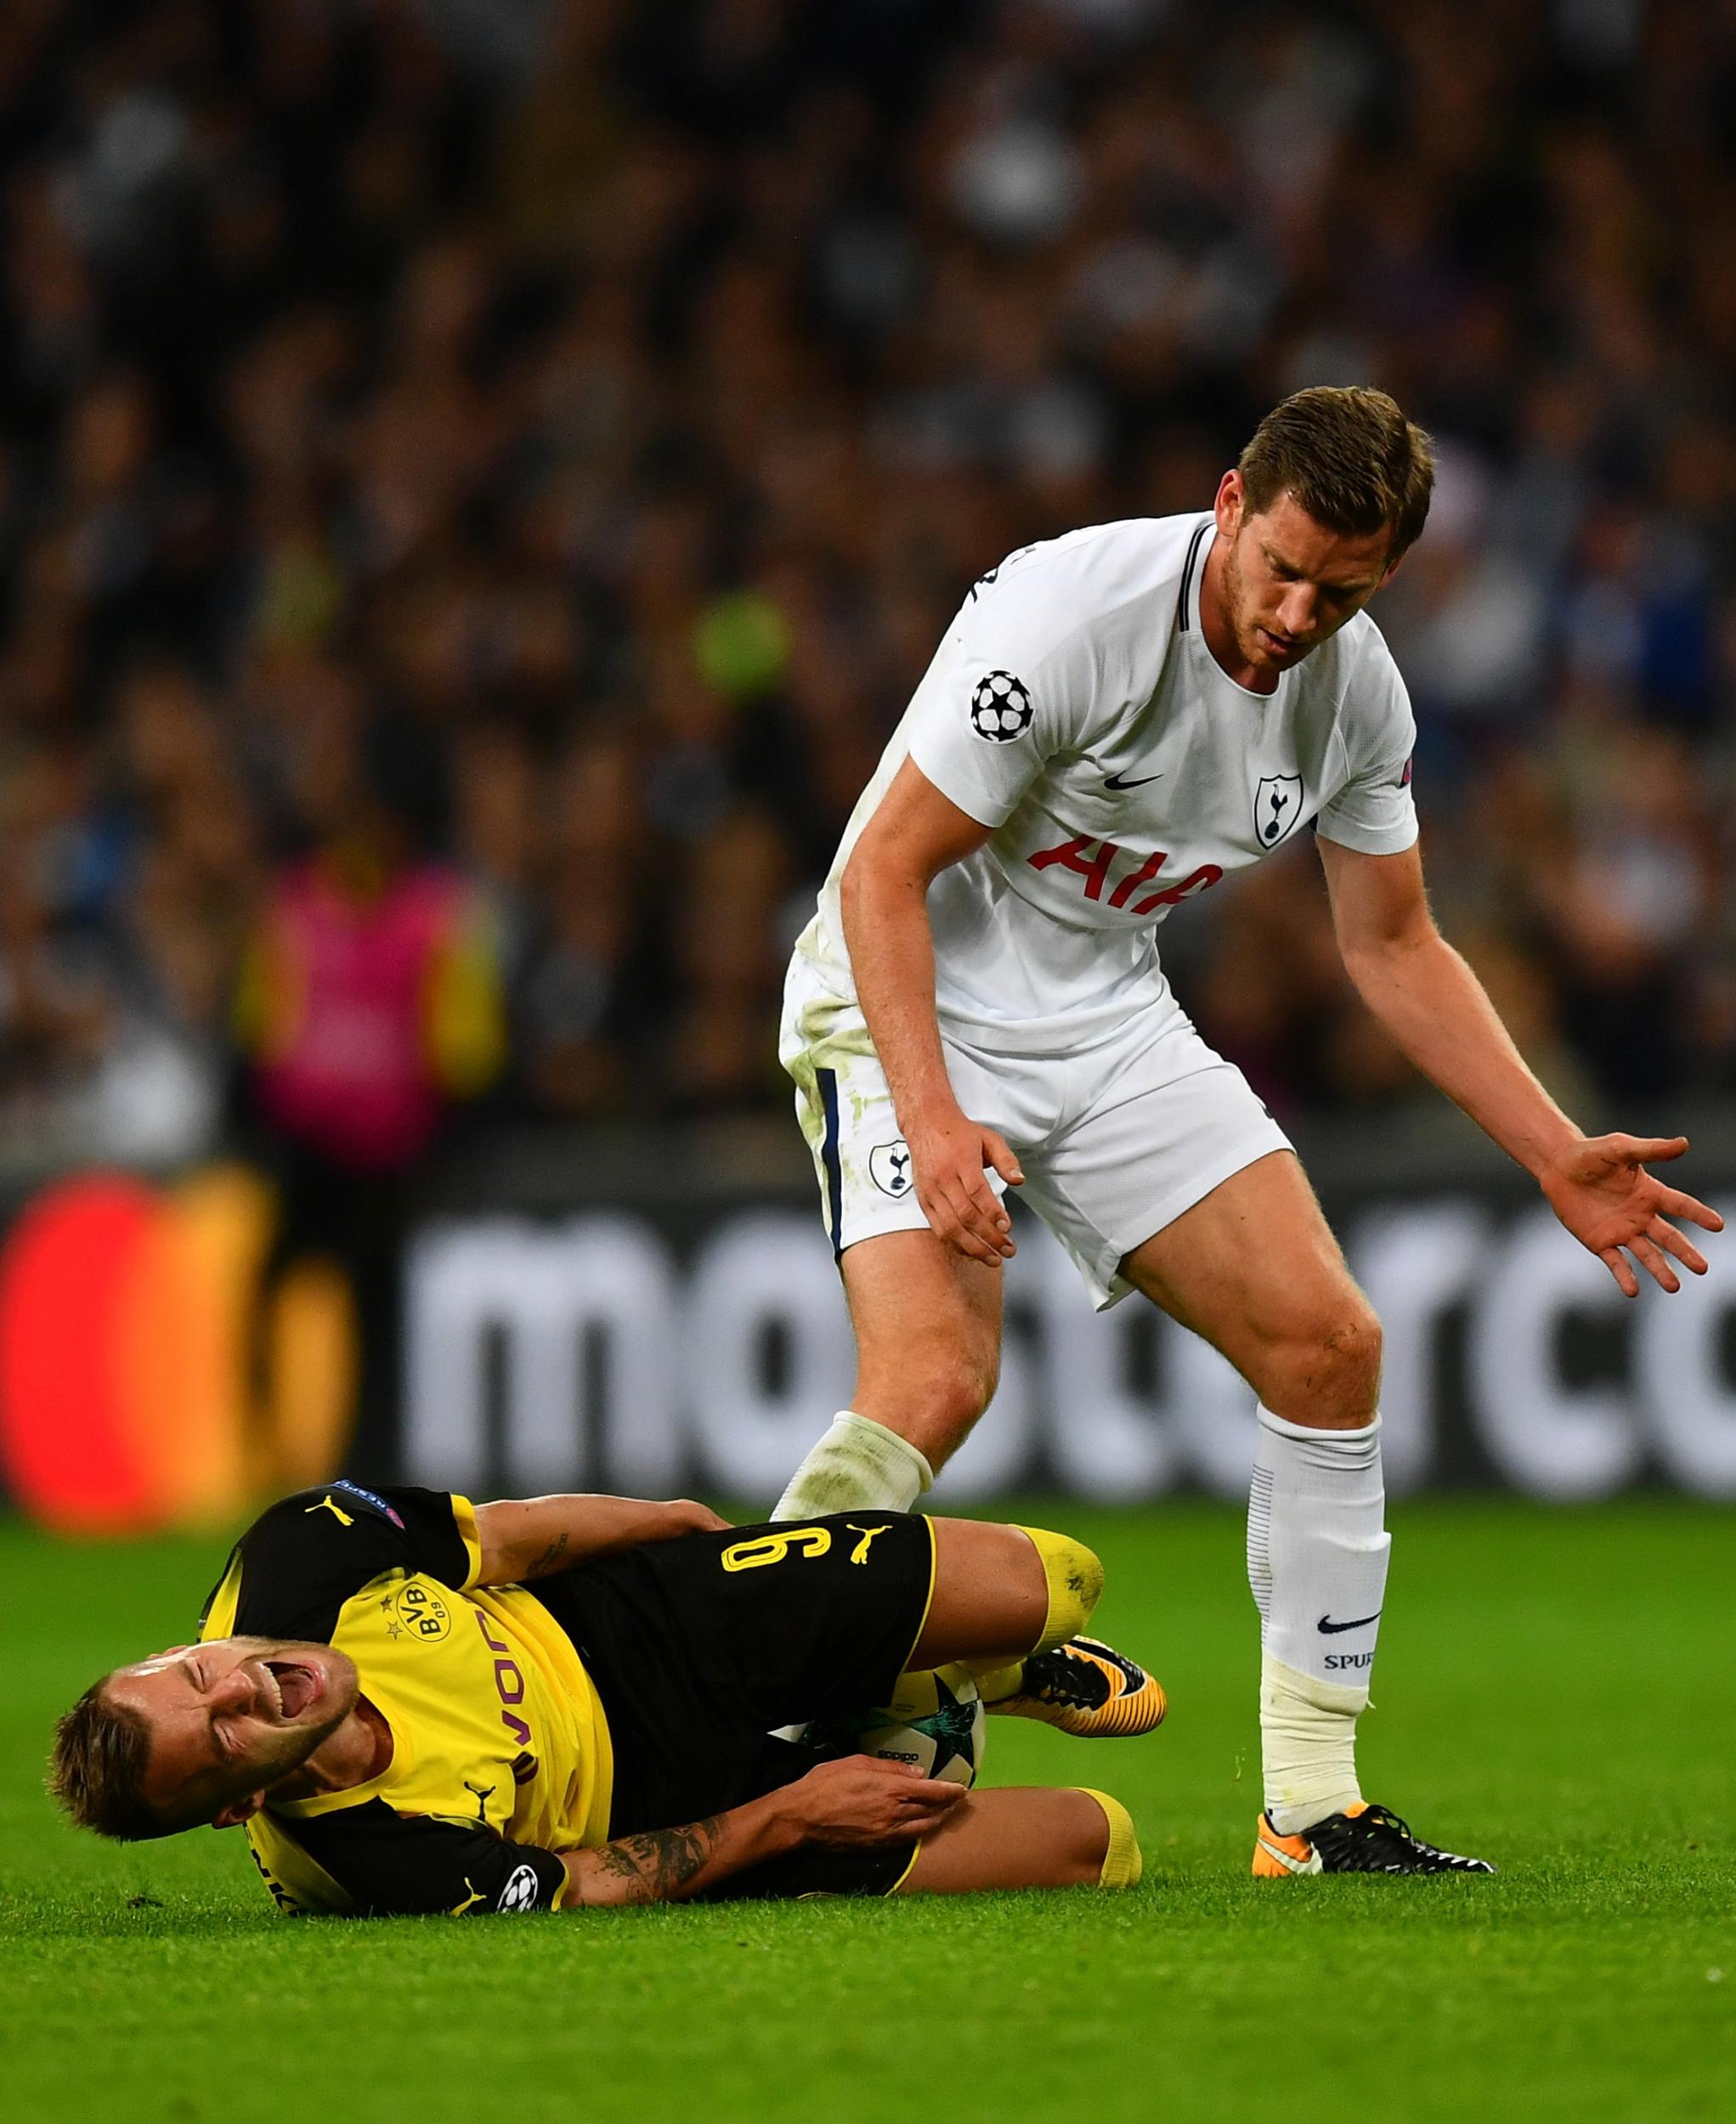 Vertonghen's red card was the only blow for Spurs